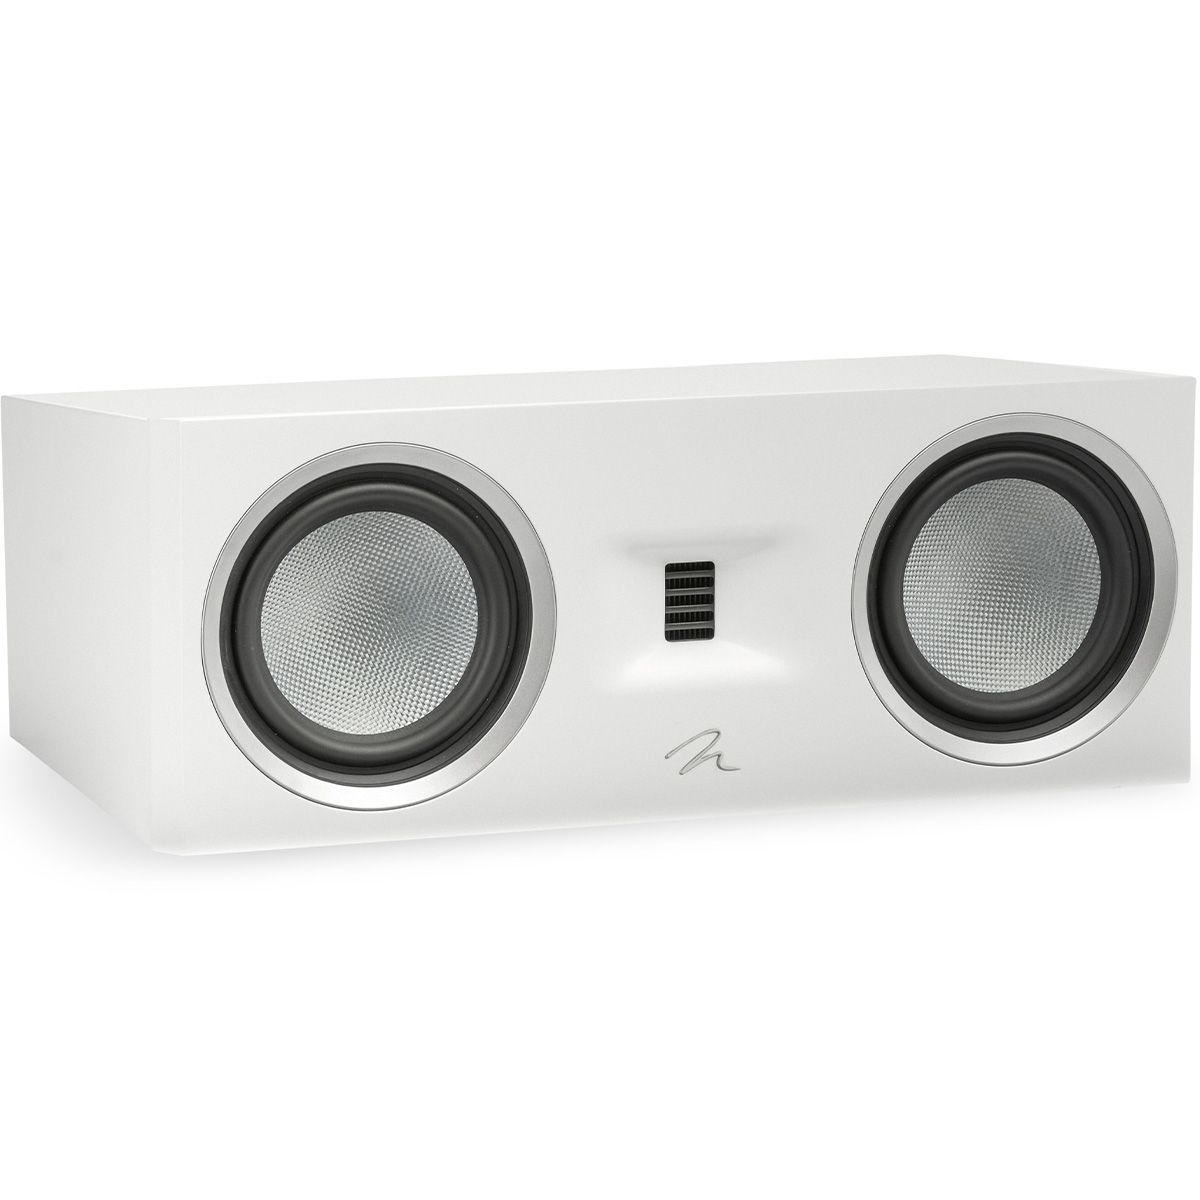 MartinLogan Motion C10  Bookshelf Speaker in white front angled view without grilles on white background